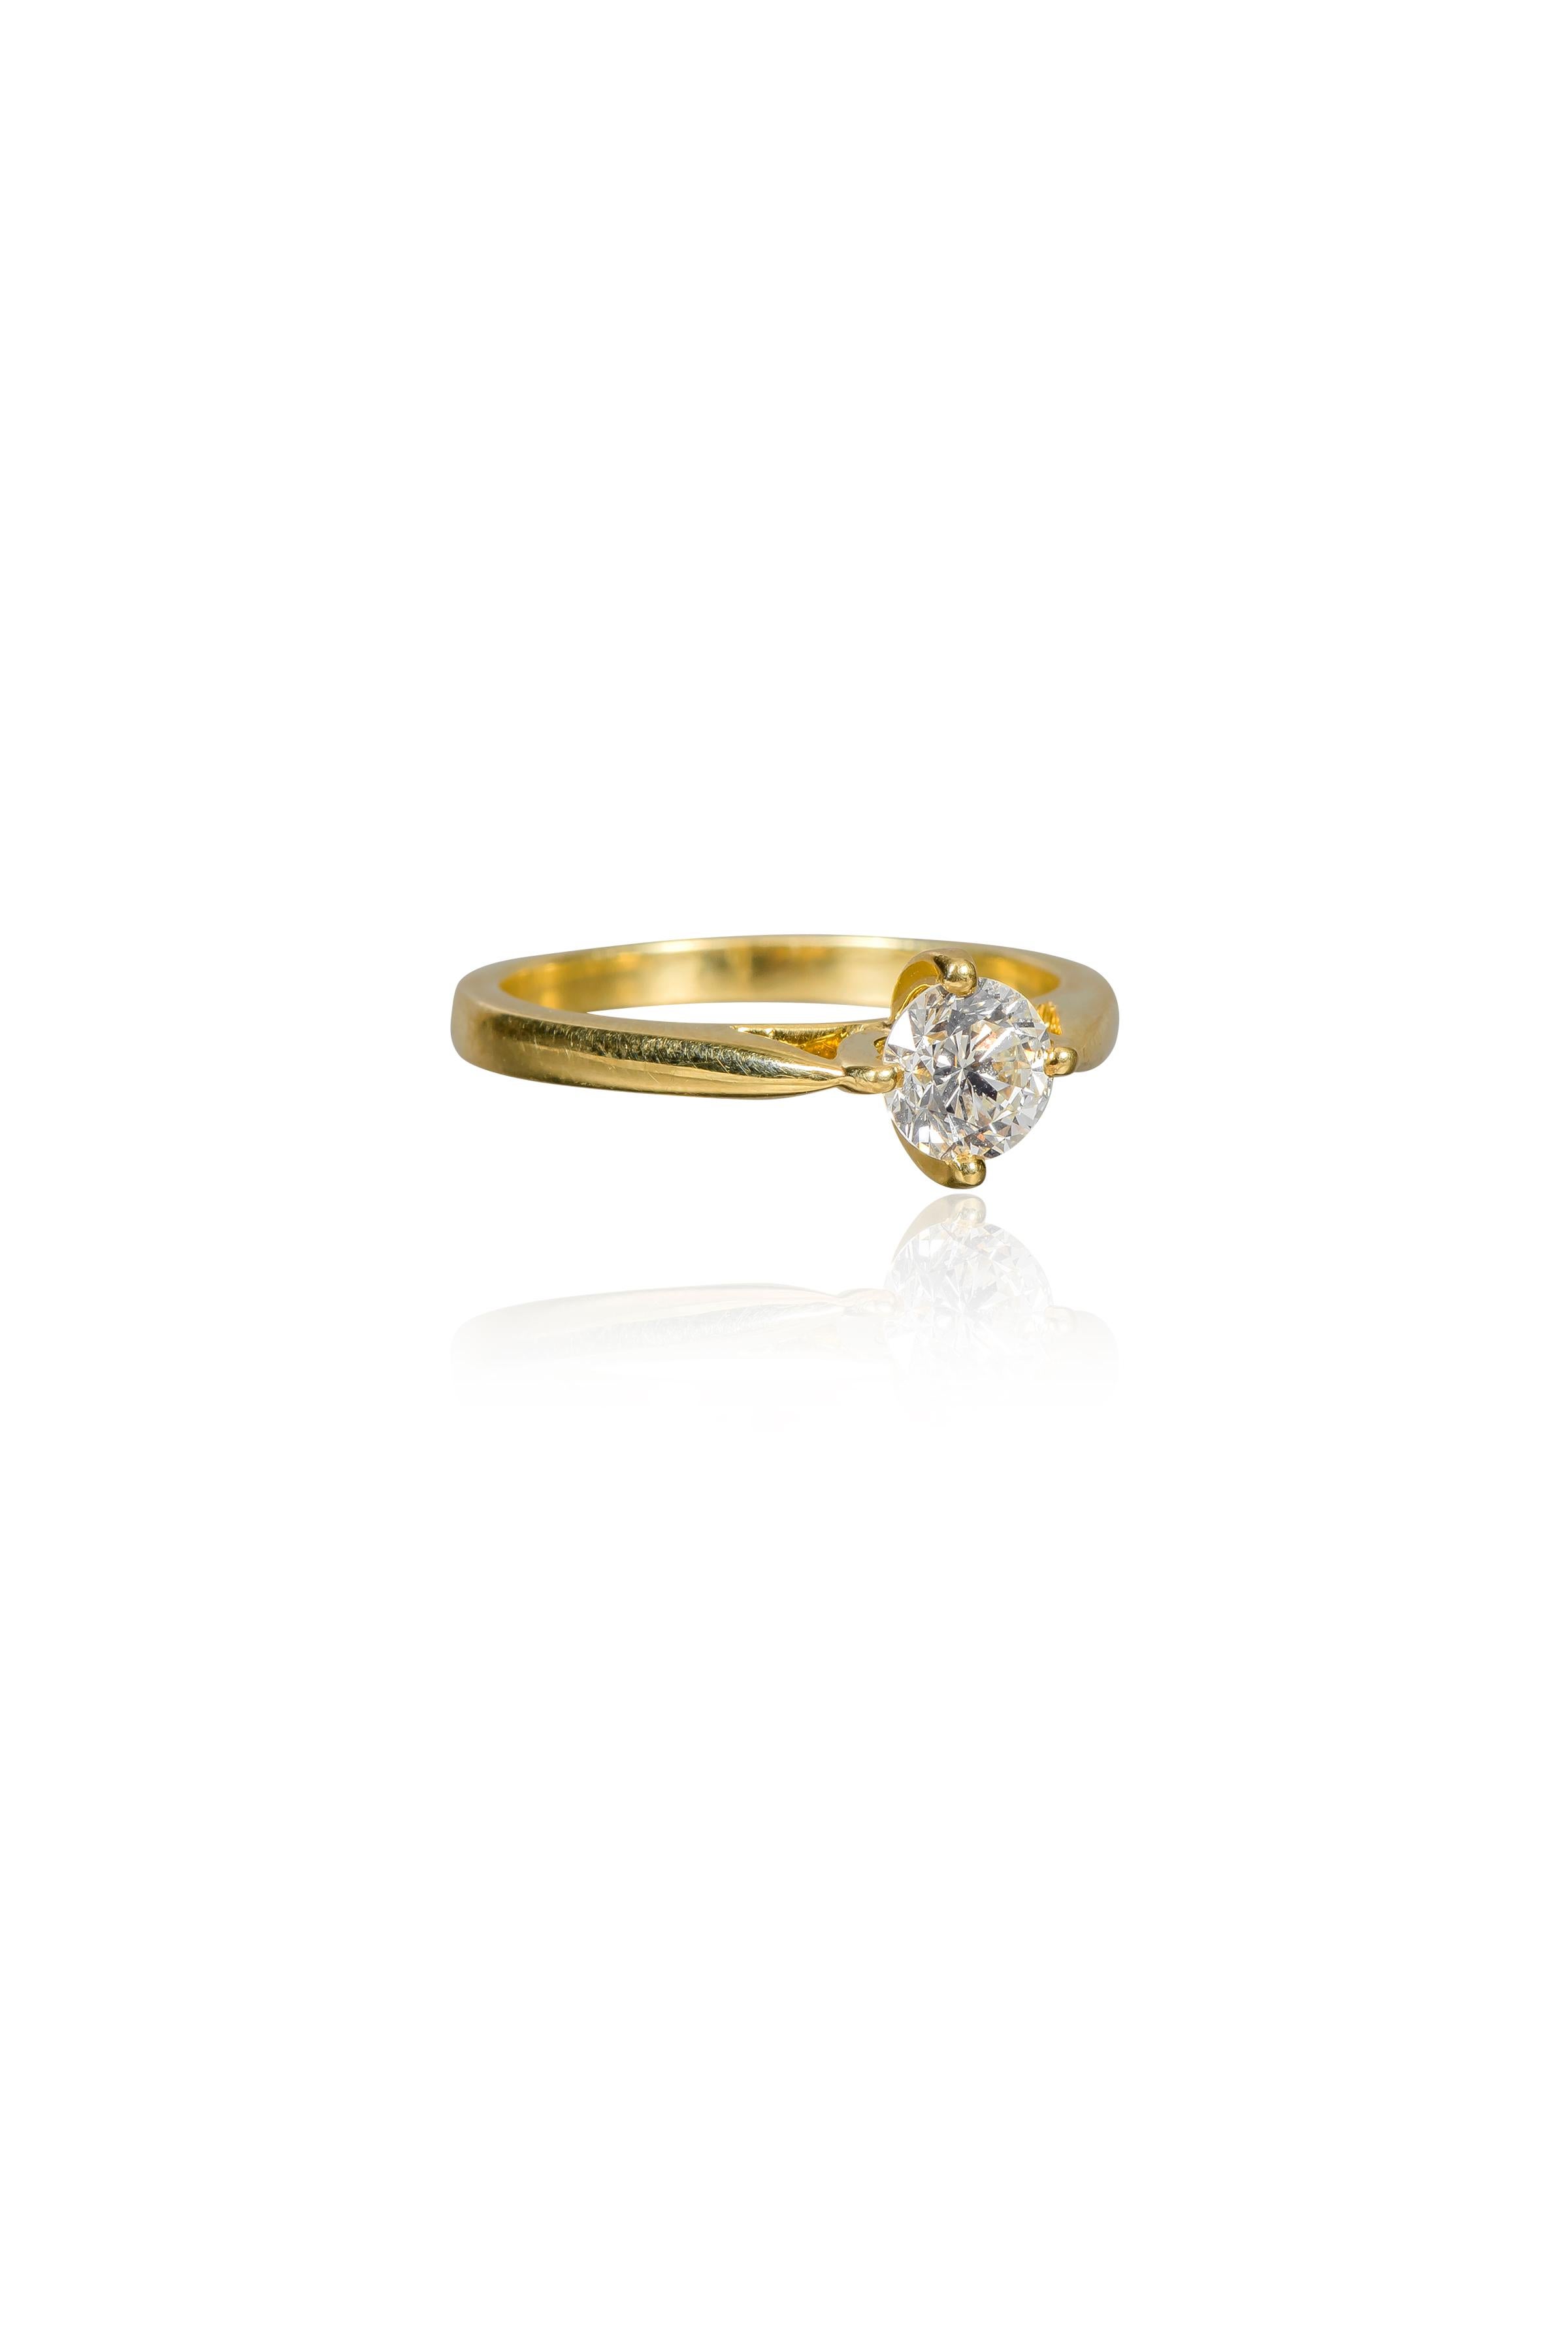 18 Karat Yellow Gold 0.70 Carat Diamond Brilliant-Cut Solitaire Engagement Ring

This magnificent solitaire round diamond engagement ring is eternal. The perfect brilliant round diamond solitaire of 0.70 carats held in the timeless four-edged prong